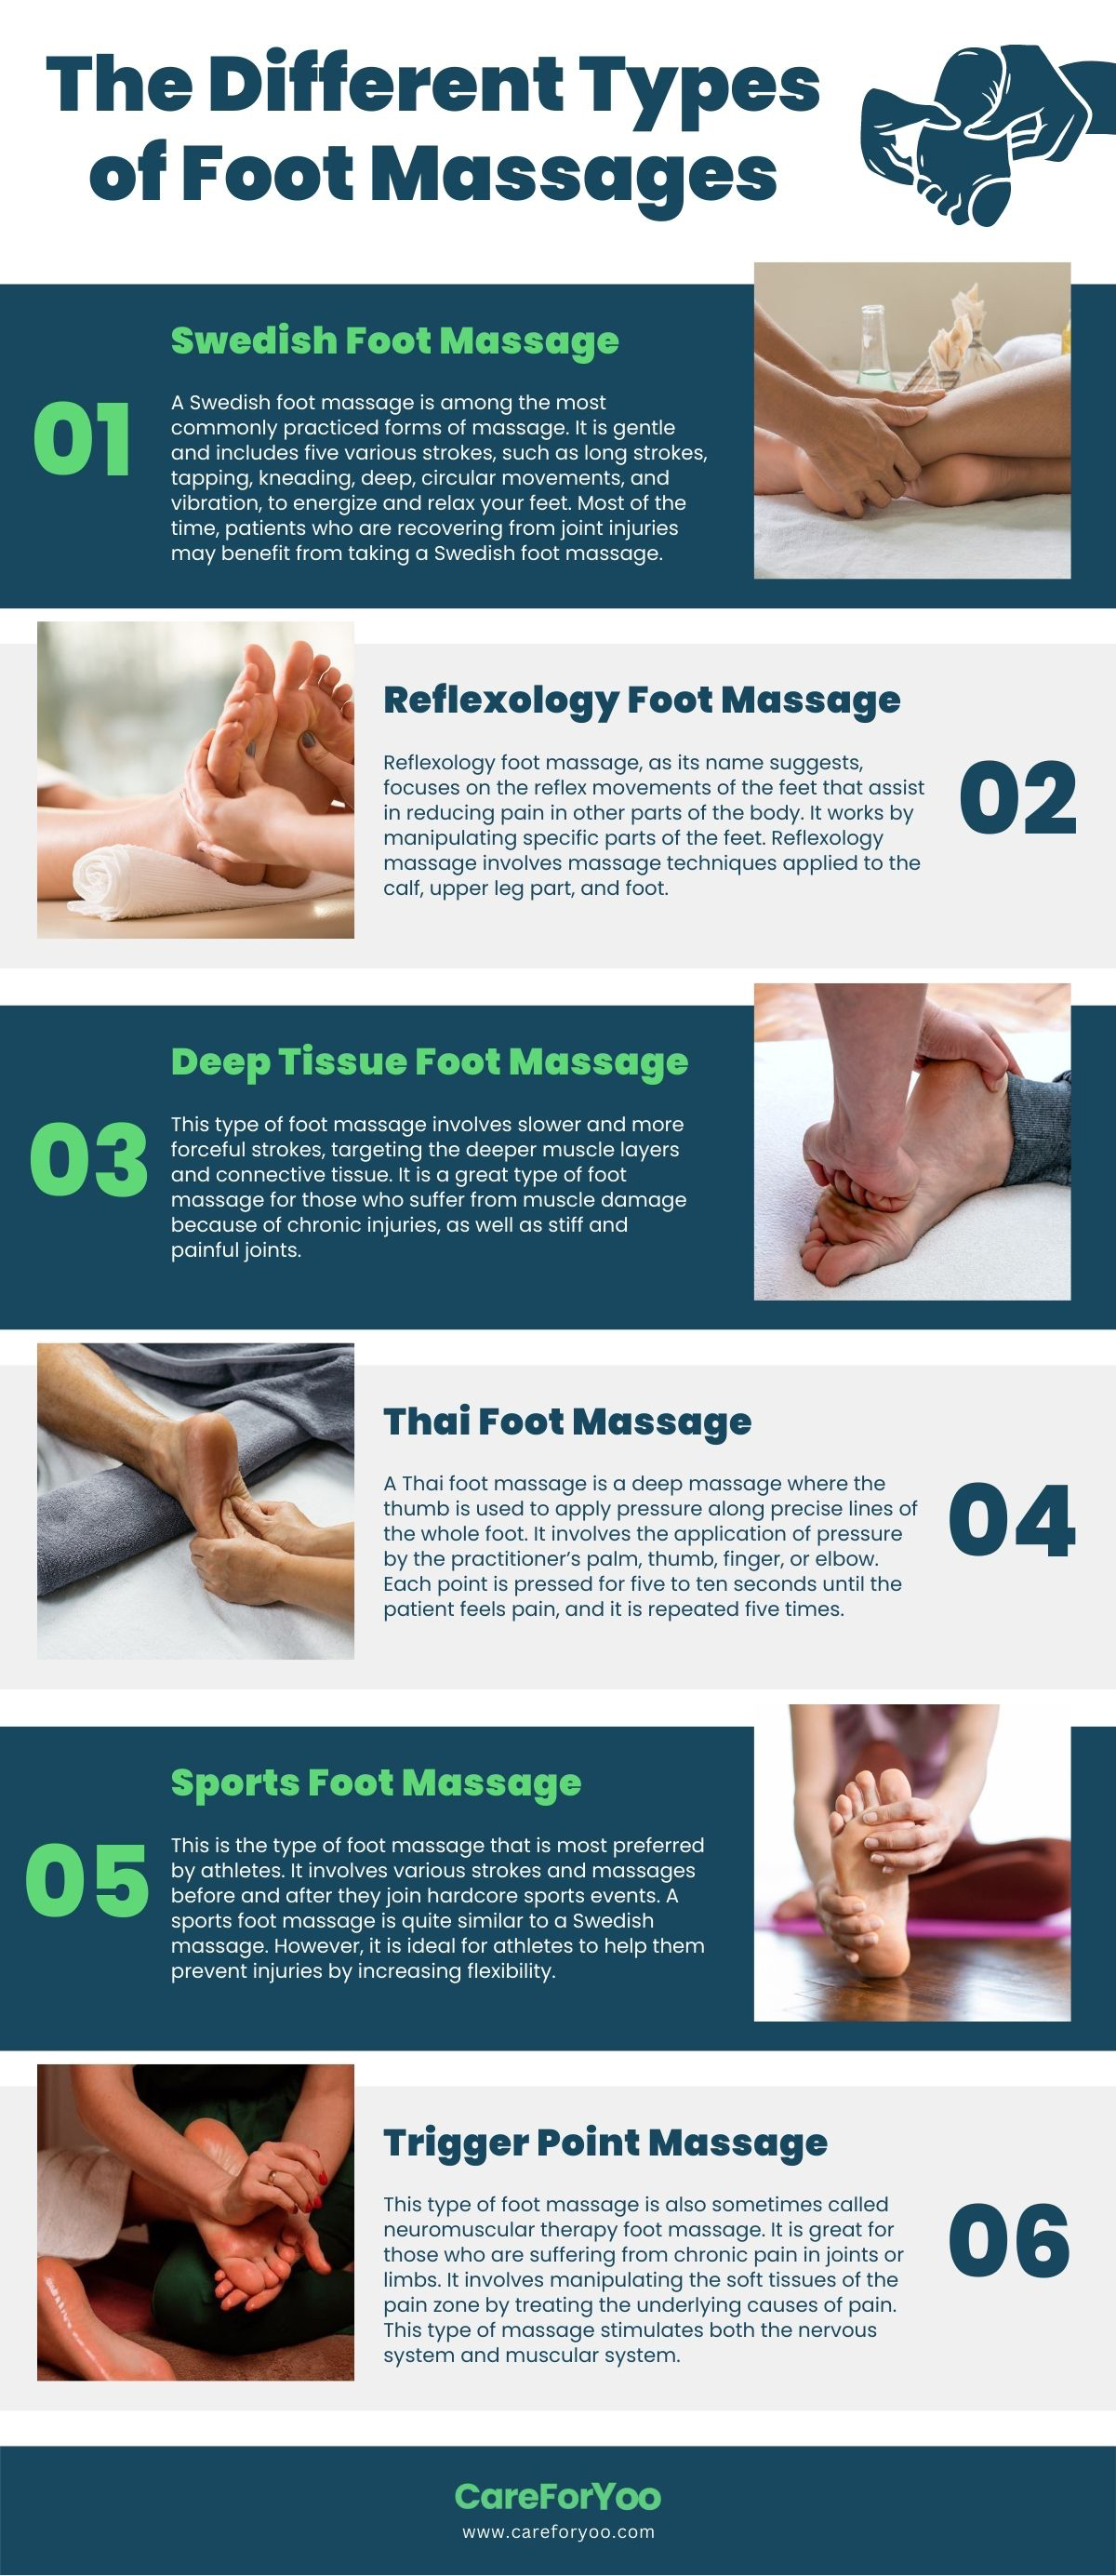 The Different Types of Foot Massages